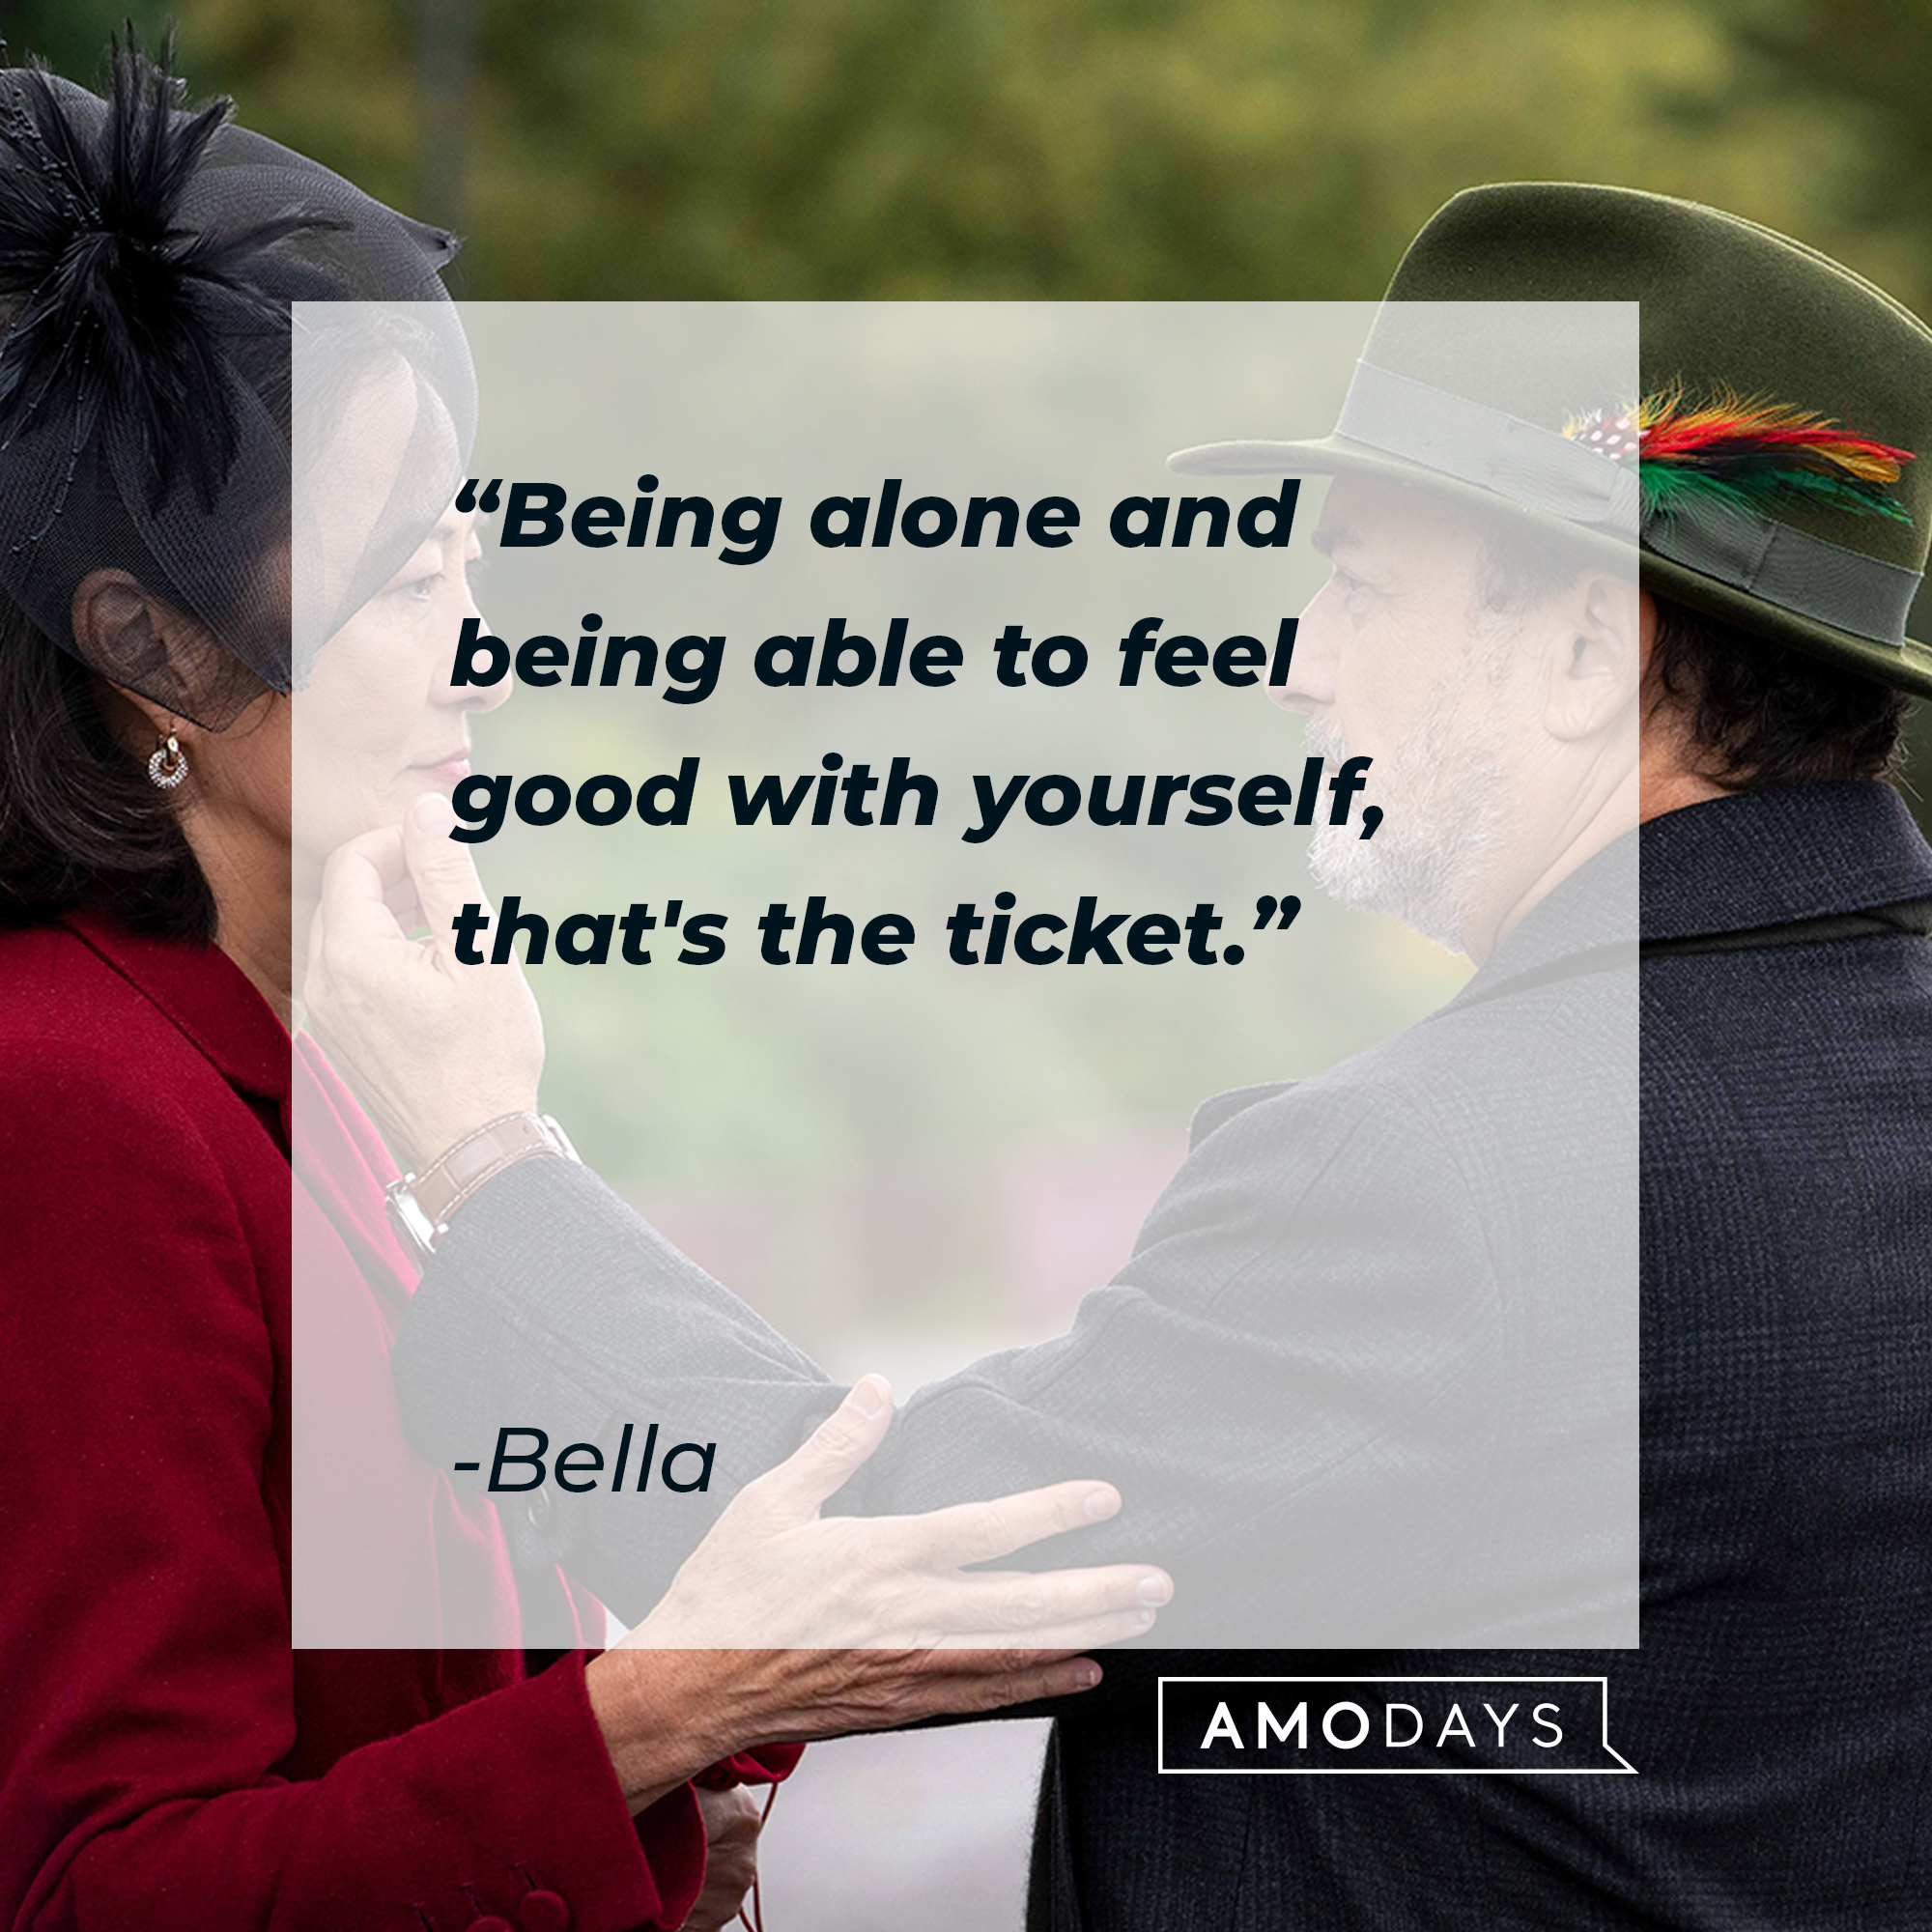 Bella's quote: "Being alone and being able to feel good with yourself, that's the ticket." | Source: facebook.com/BetterThingsFX